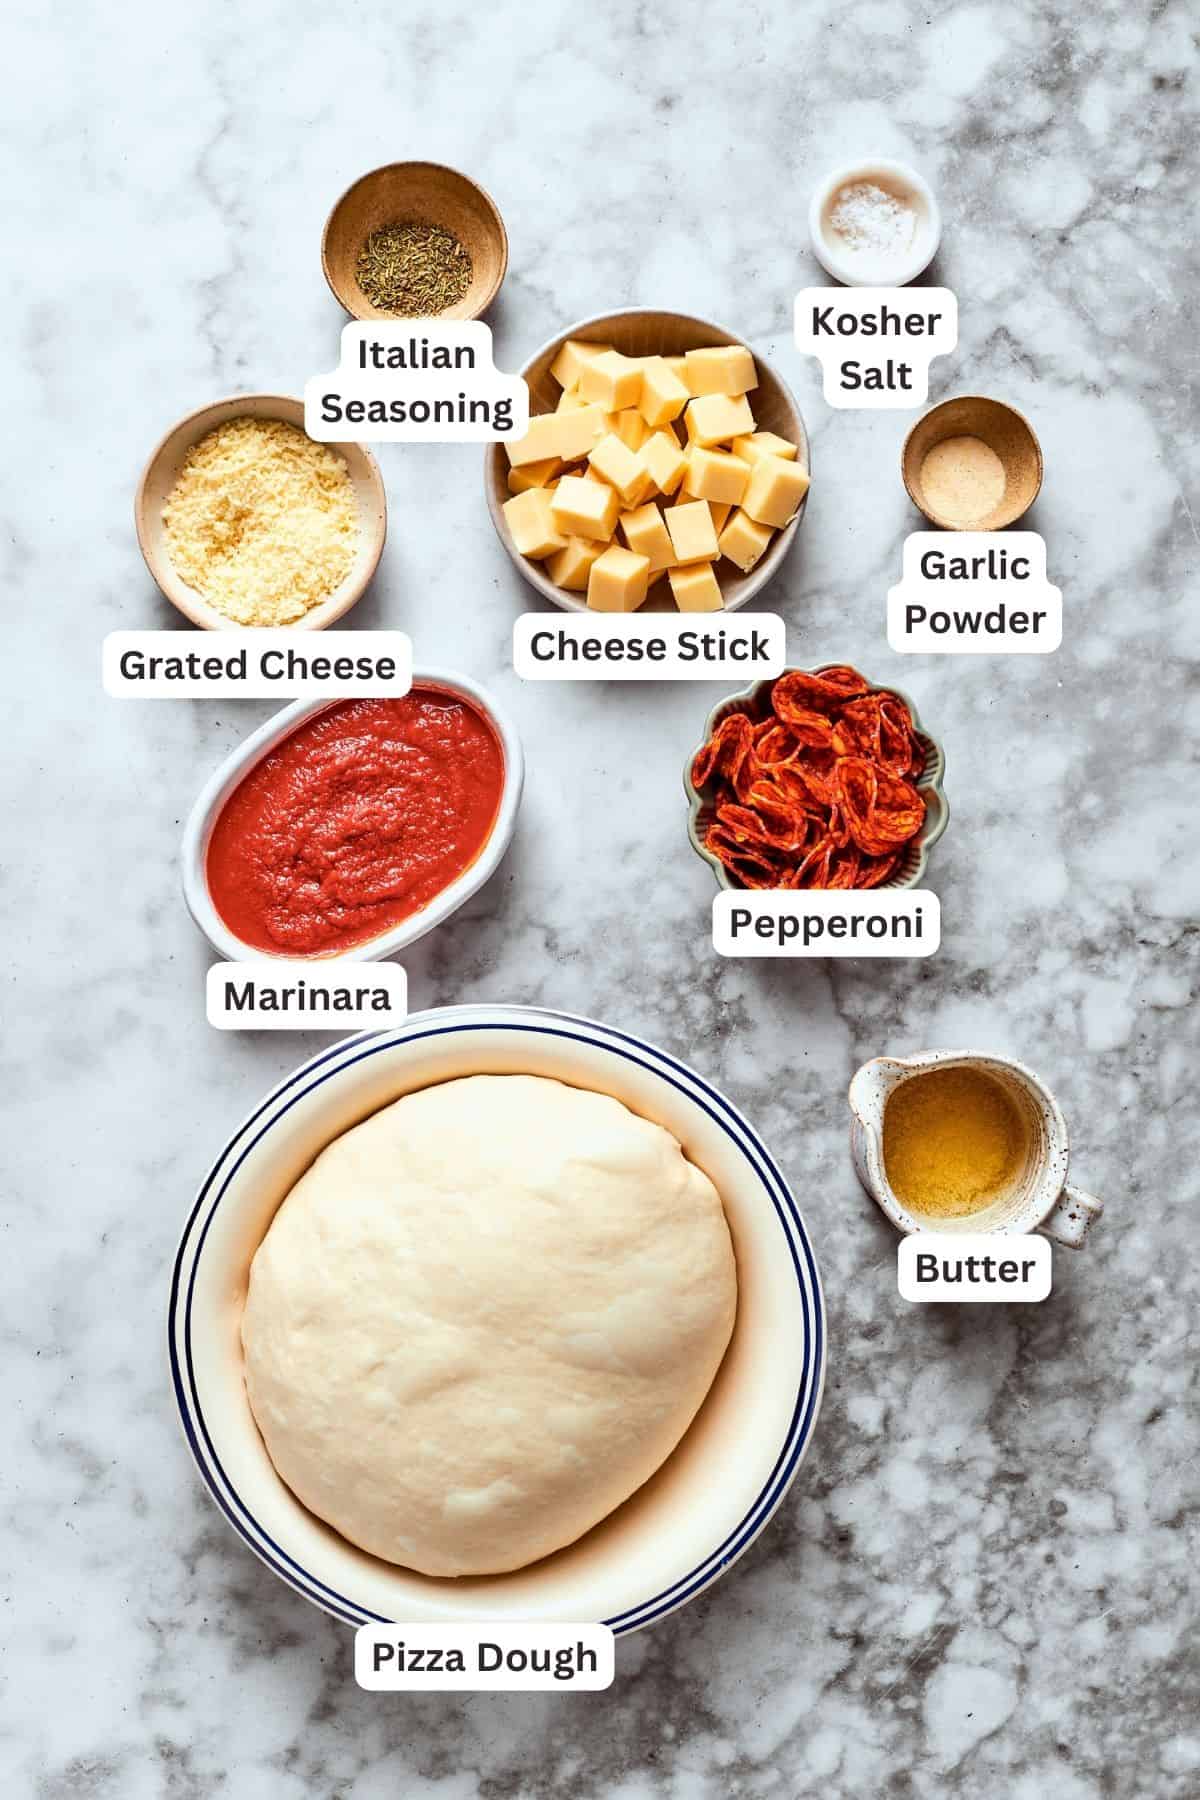 Ingredients for pizza burgers are labelled and portioned out: pizza dough, grated cheese, Italian seasoning, marinara sauce, pepperoni, butter, garlic powder, cheese stick, salt.